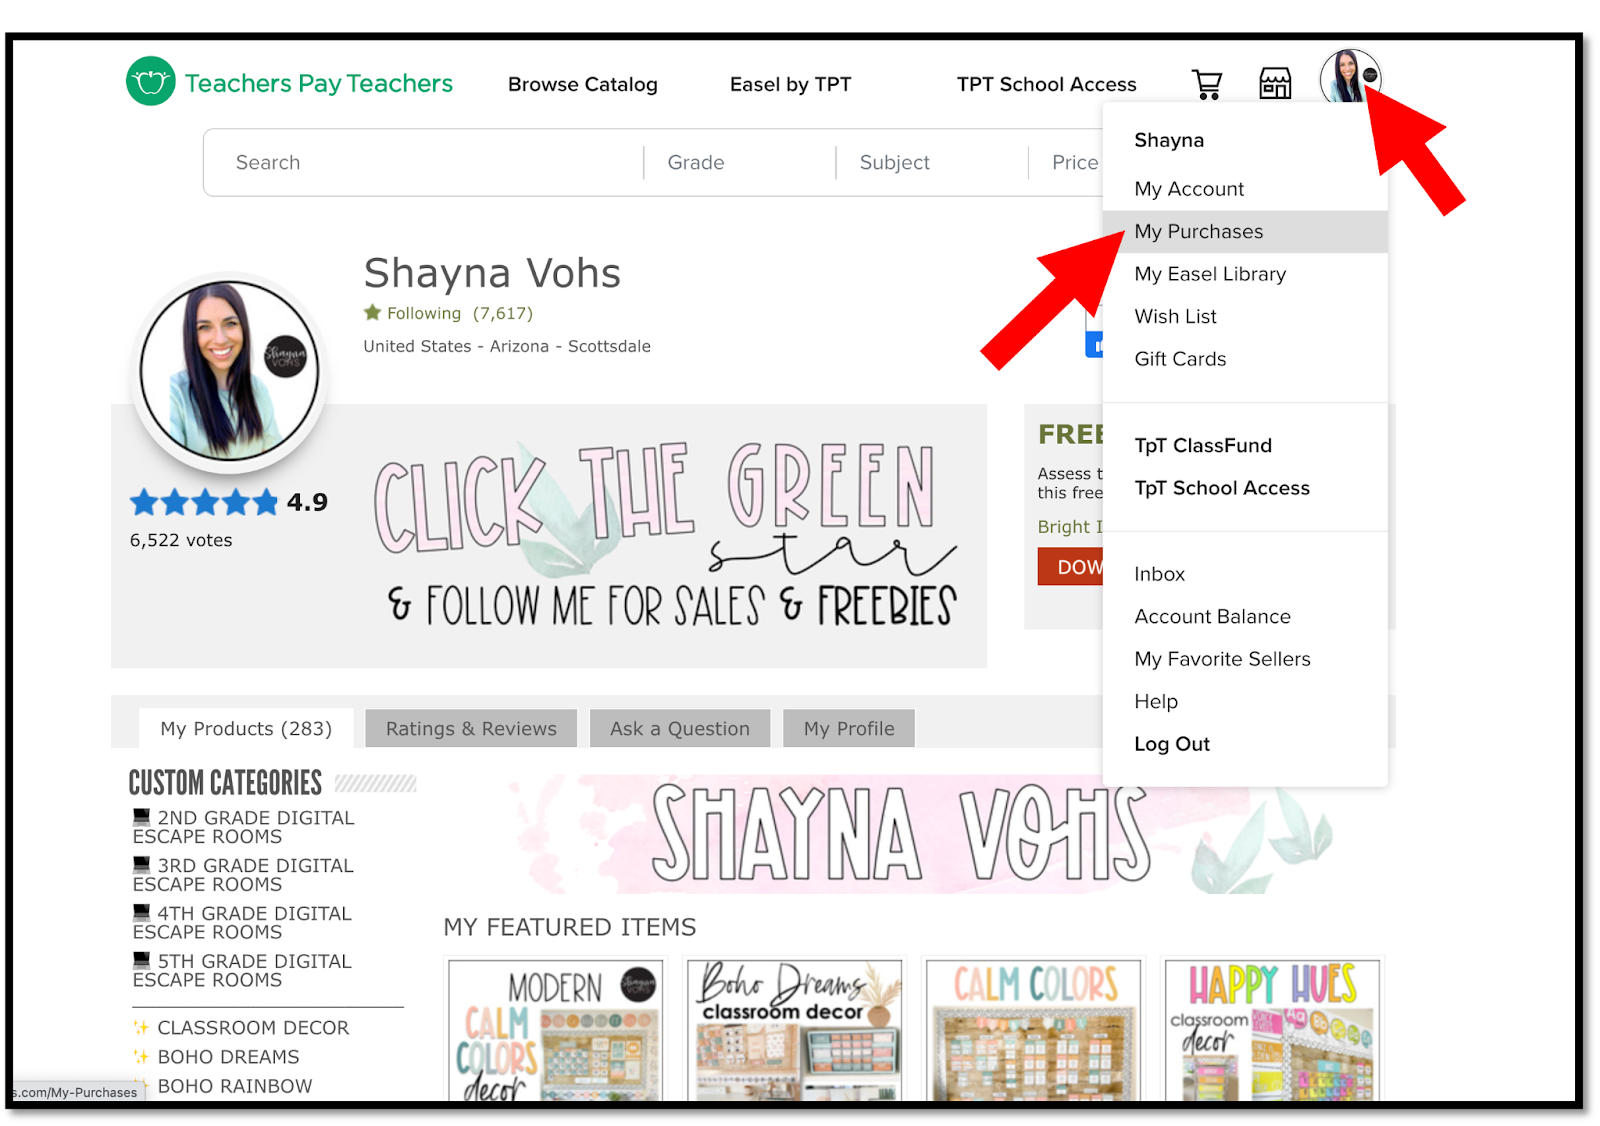 This image shows how to click on your picture then "My Purchases" on TpT to re-download a product.